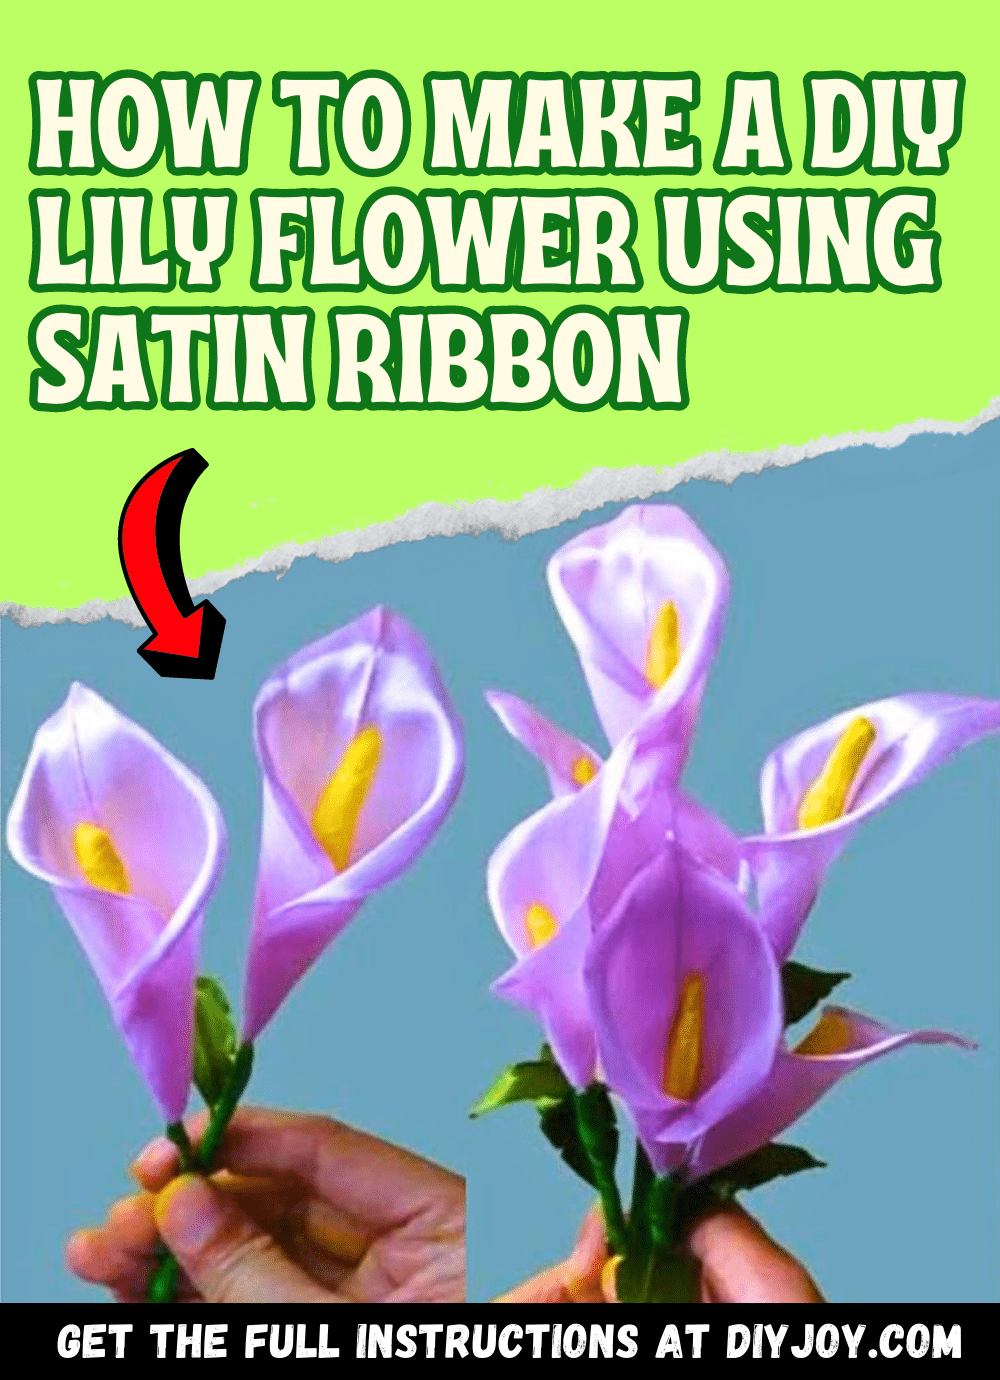 How to Make a DIY Lily Flower Using Satin Ribbon